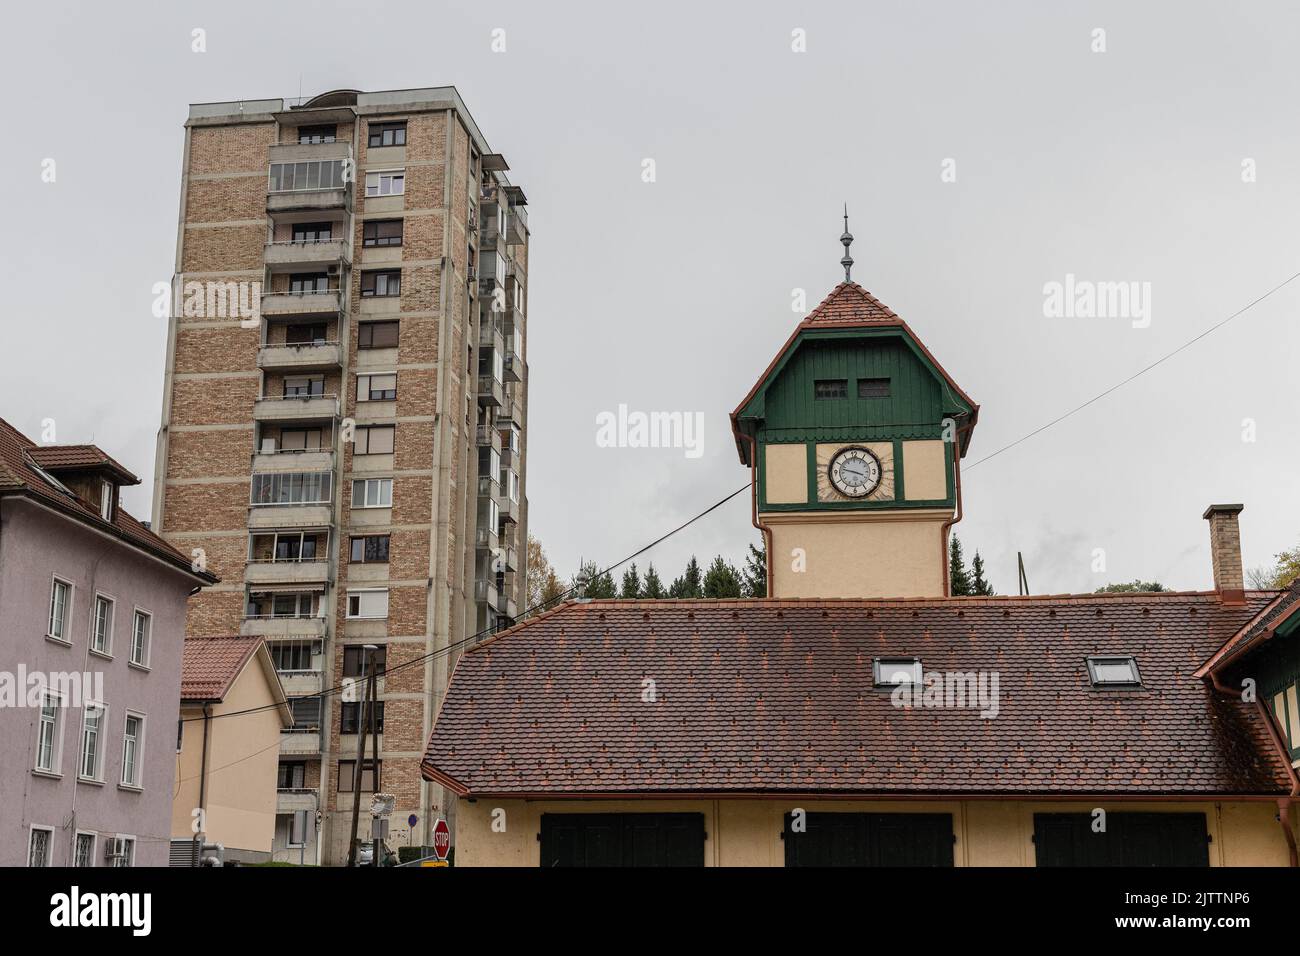 Interesting roof and a small house with clock tower, such as fire station or something similar in trbovlje, slovenia. Old city block in the background Stock Photo